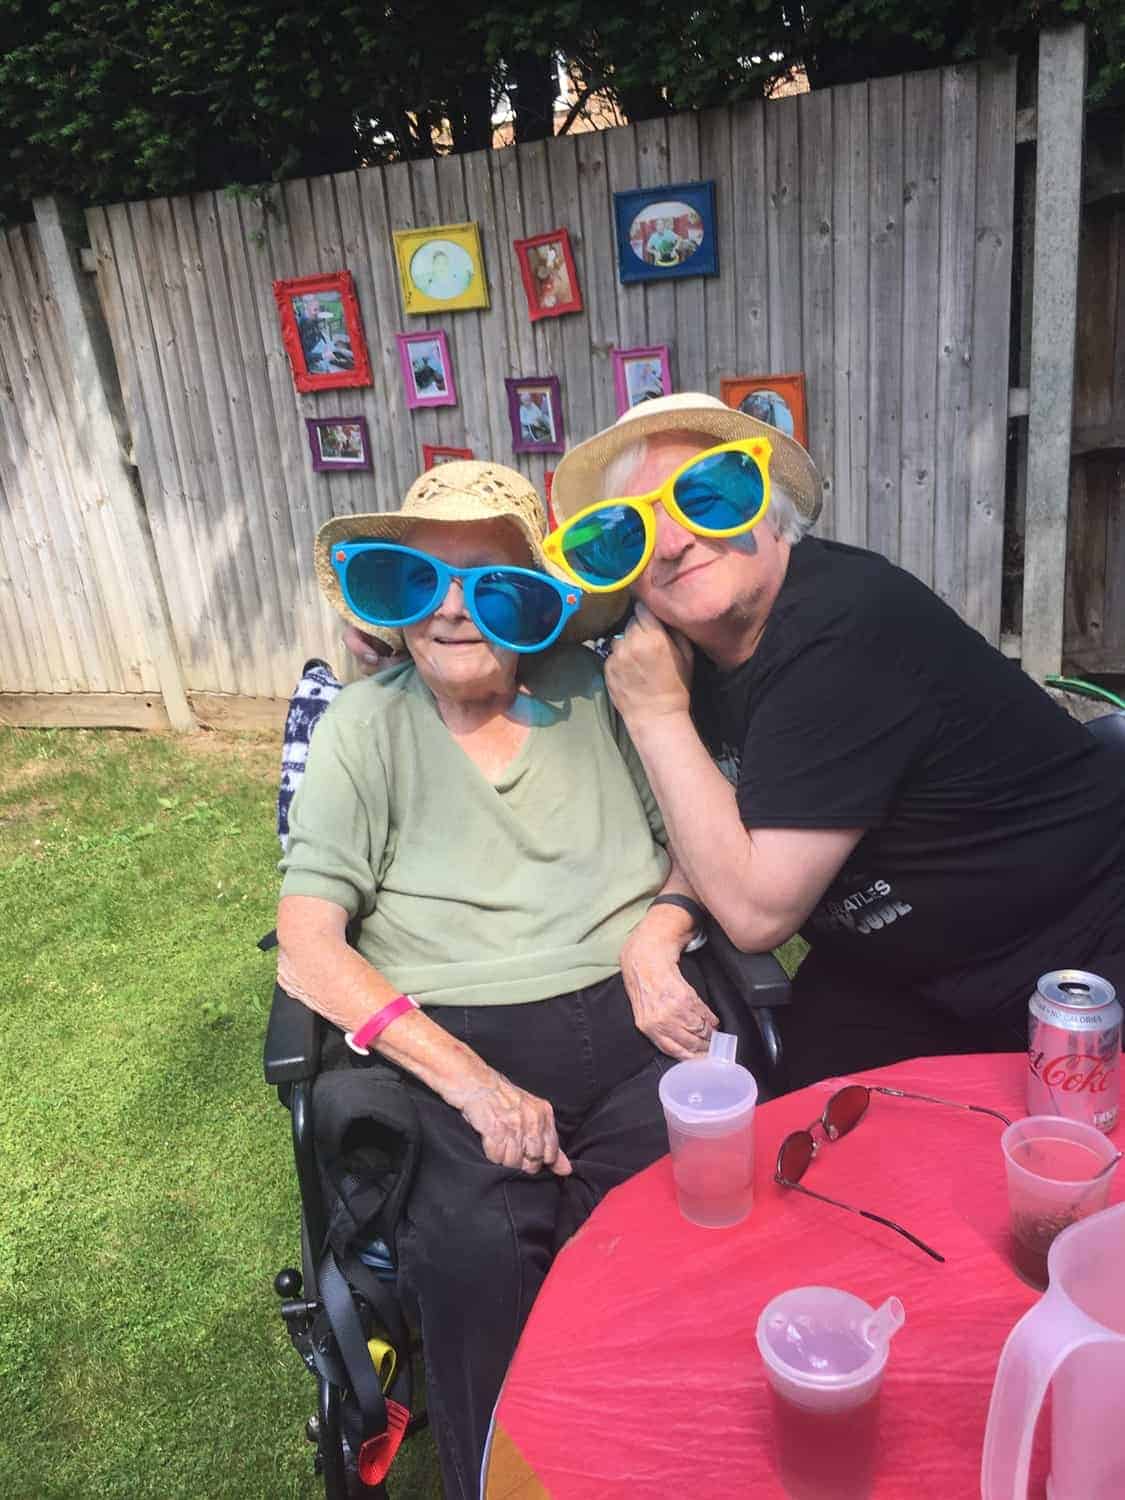 Two individuals at an outdoor gallery gathering, sporting large playful sunglasses and hats, sharing a happy moment together.